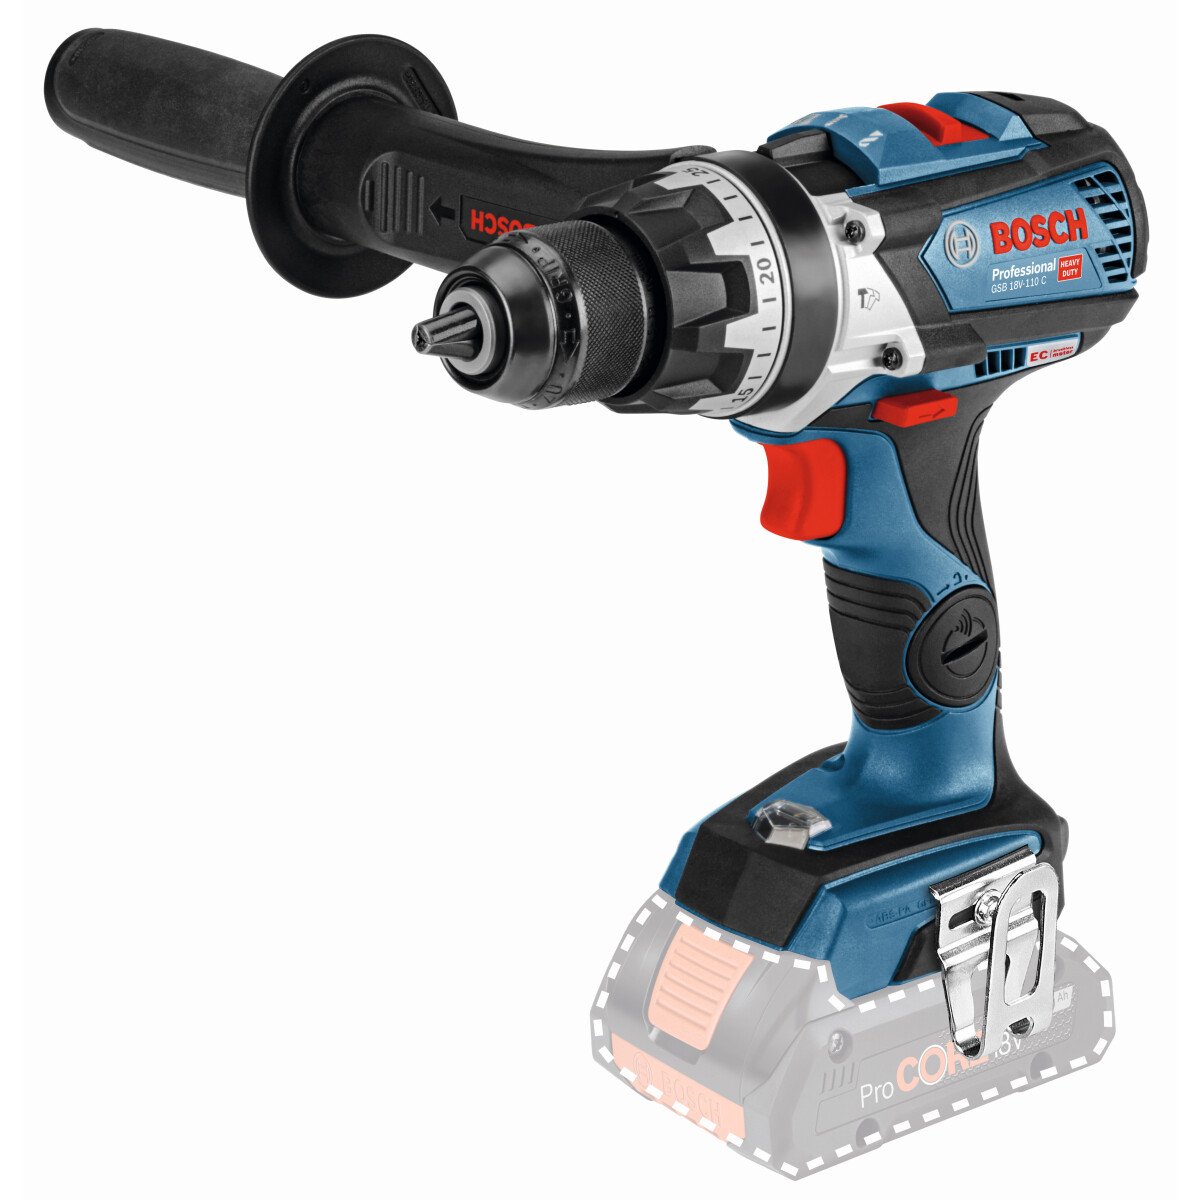 Bosch GSB18V-110CN Body Only 18V Connection Ready Brushless 2-Speed Combi Drill in Carton